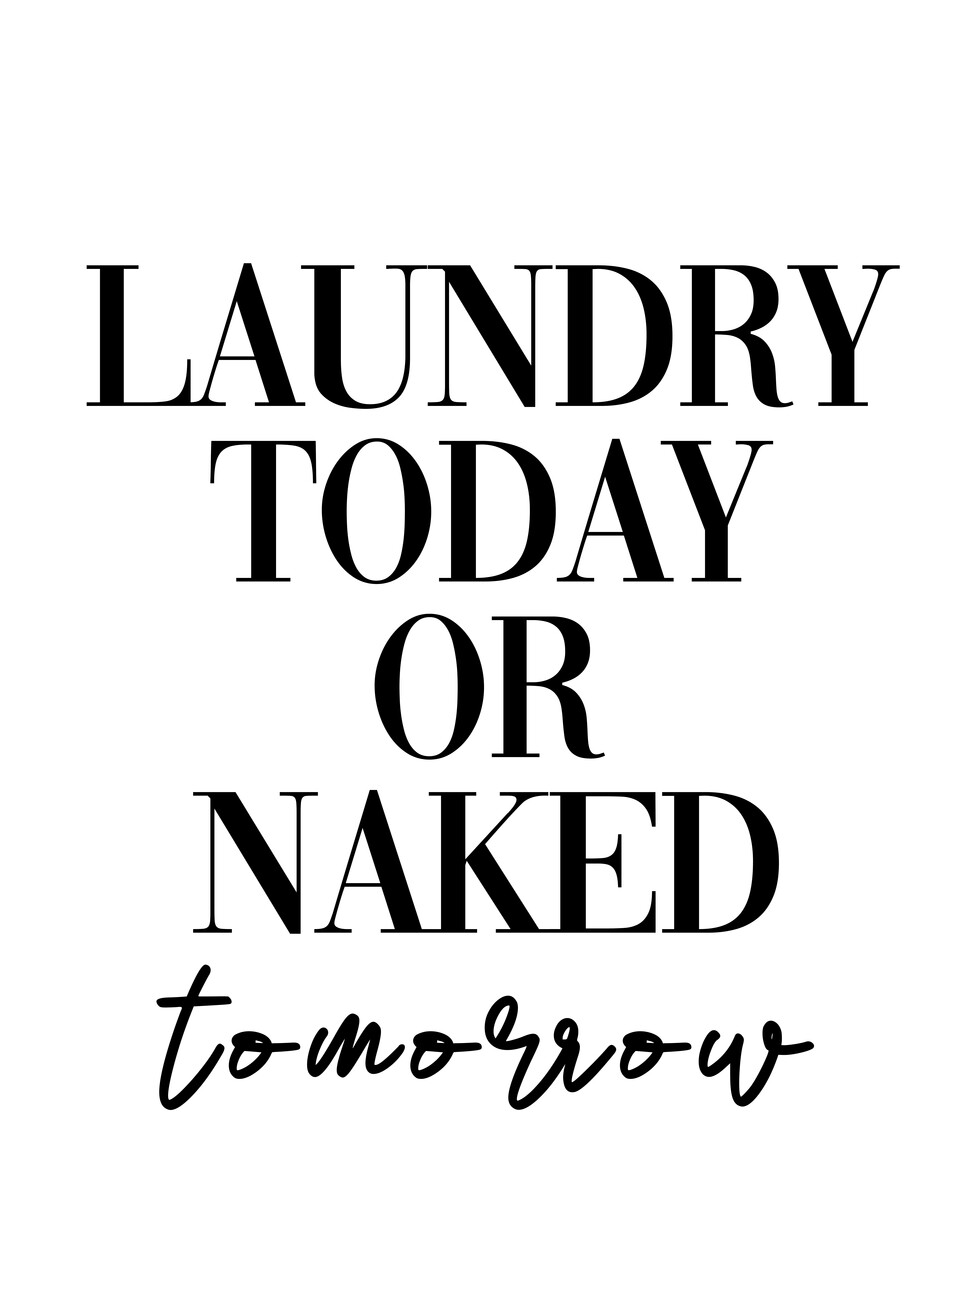  BIBITIME Laundry Today or Naked Tomorrow  Hanging